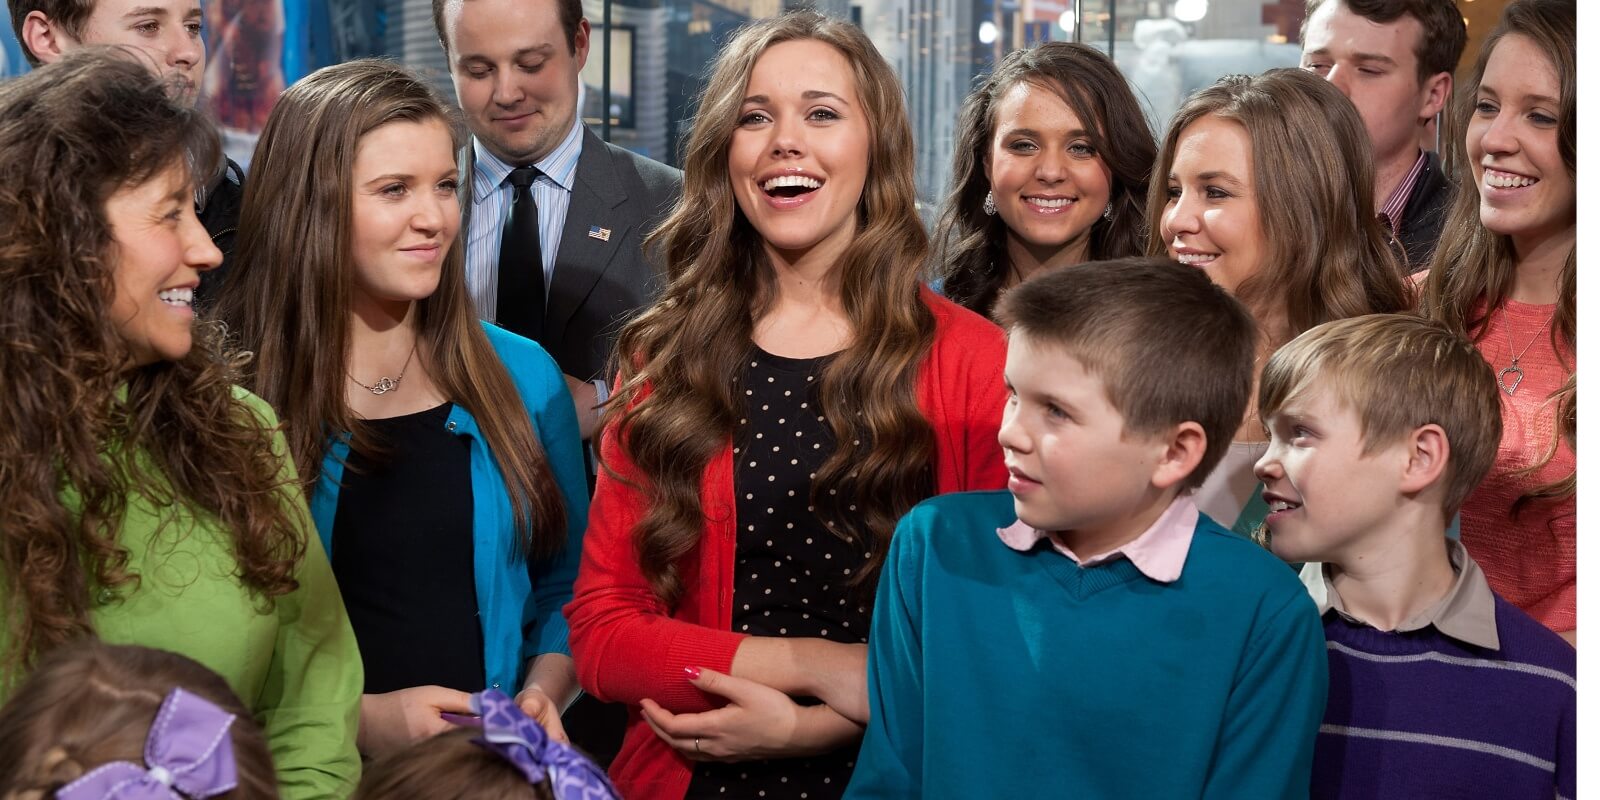 Michelle Duggar and the Duggar family pose together during an appearance on the television series 'Extra' in 2014.